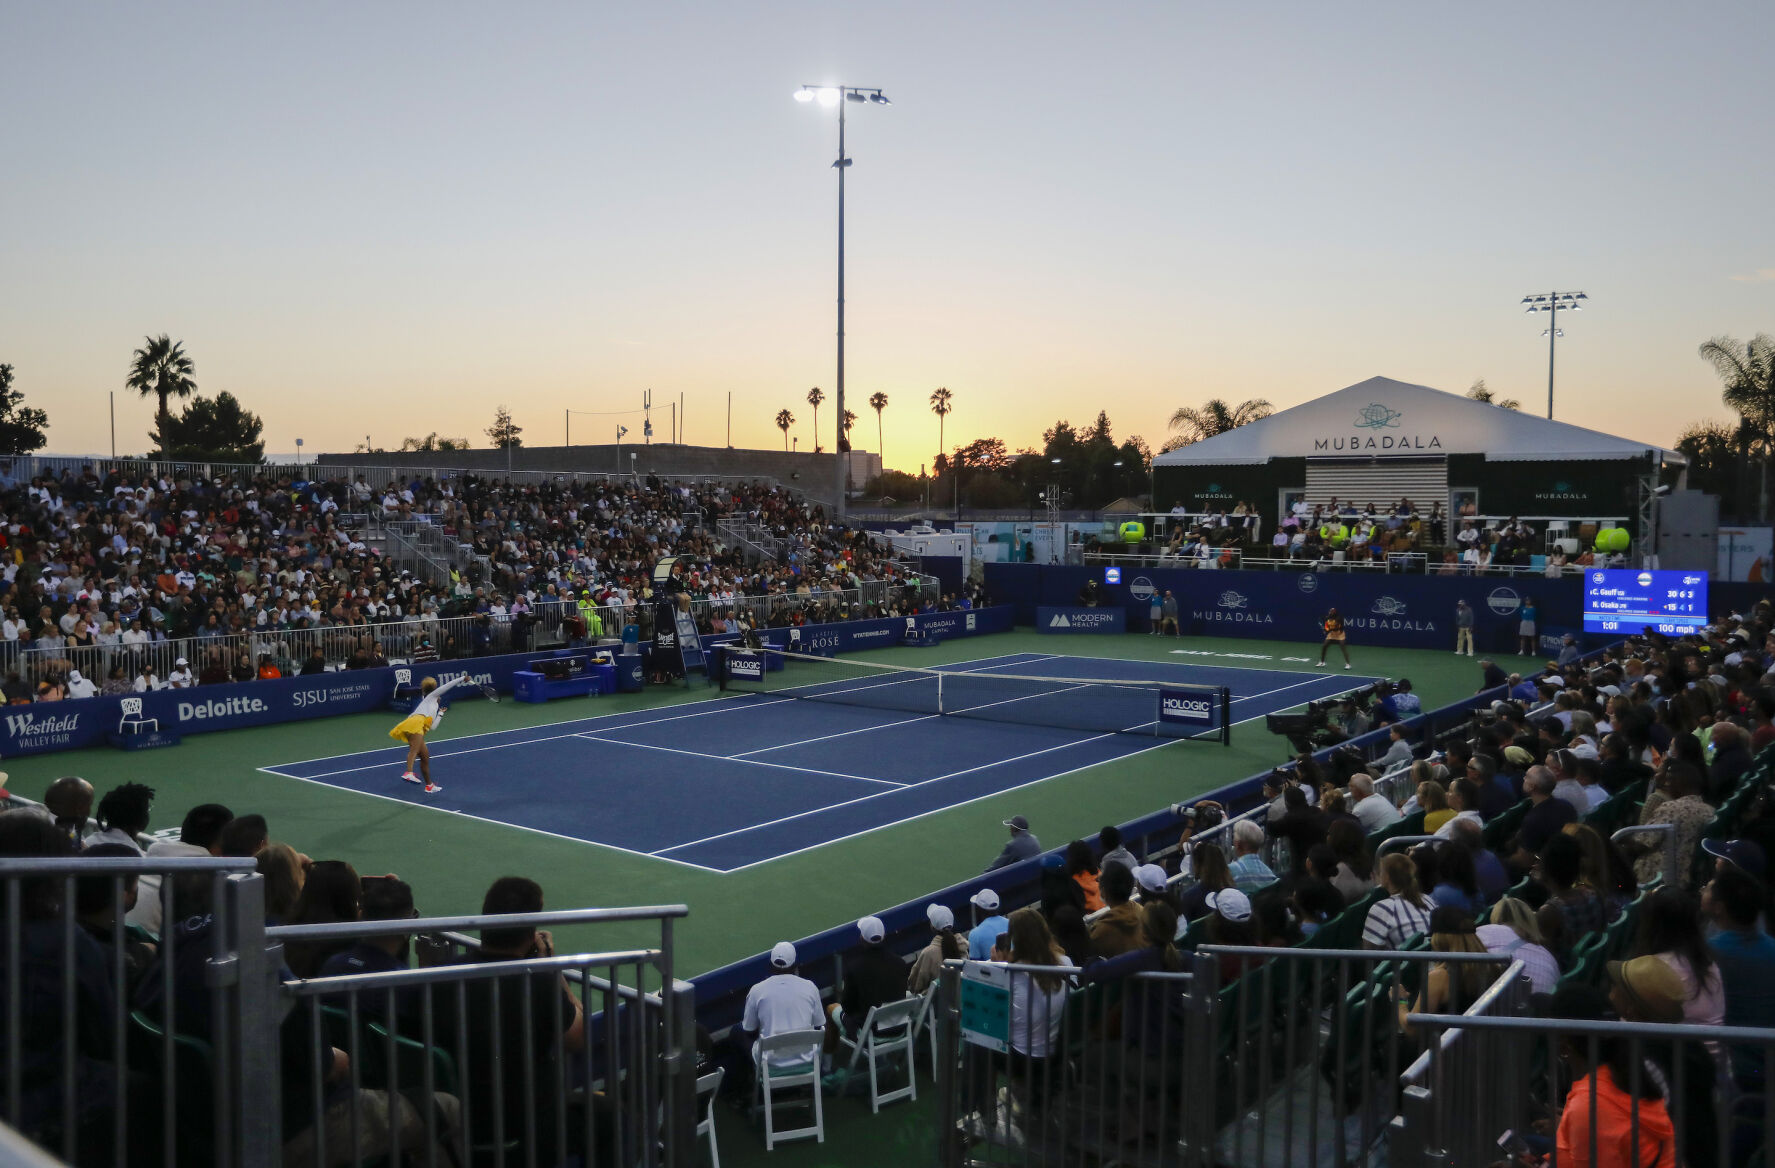 Bay Area loses longtime womens tennis event as WTA moves to Washington D.C